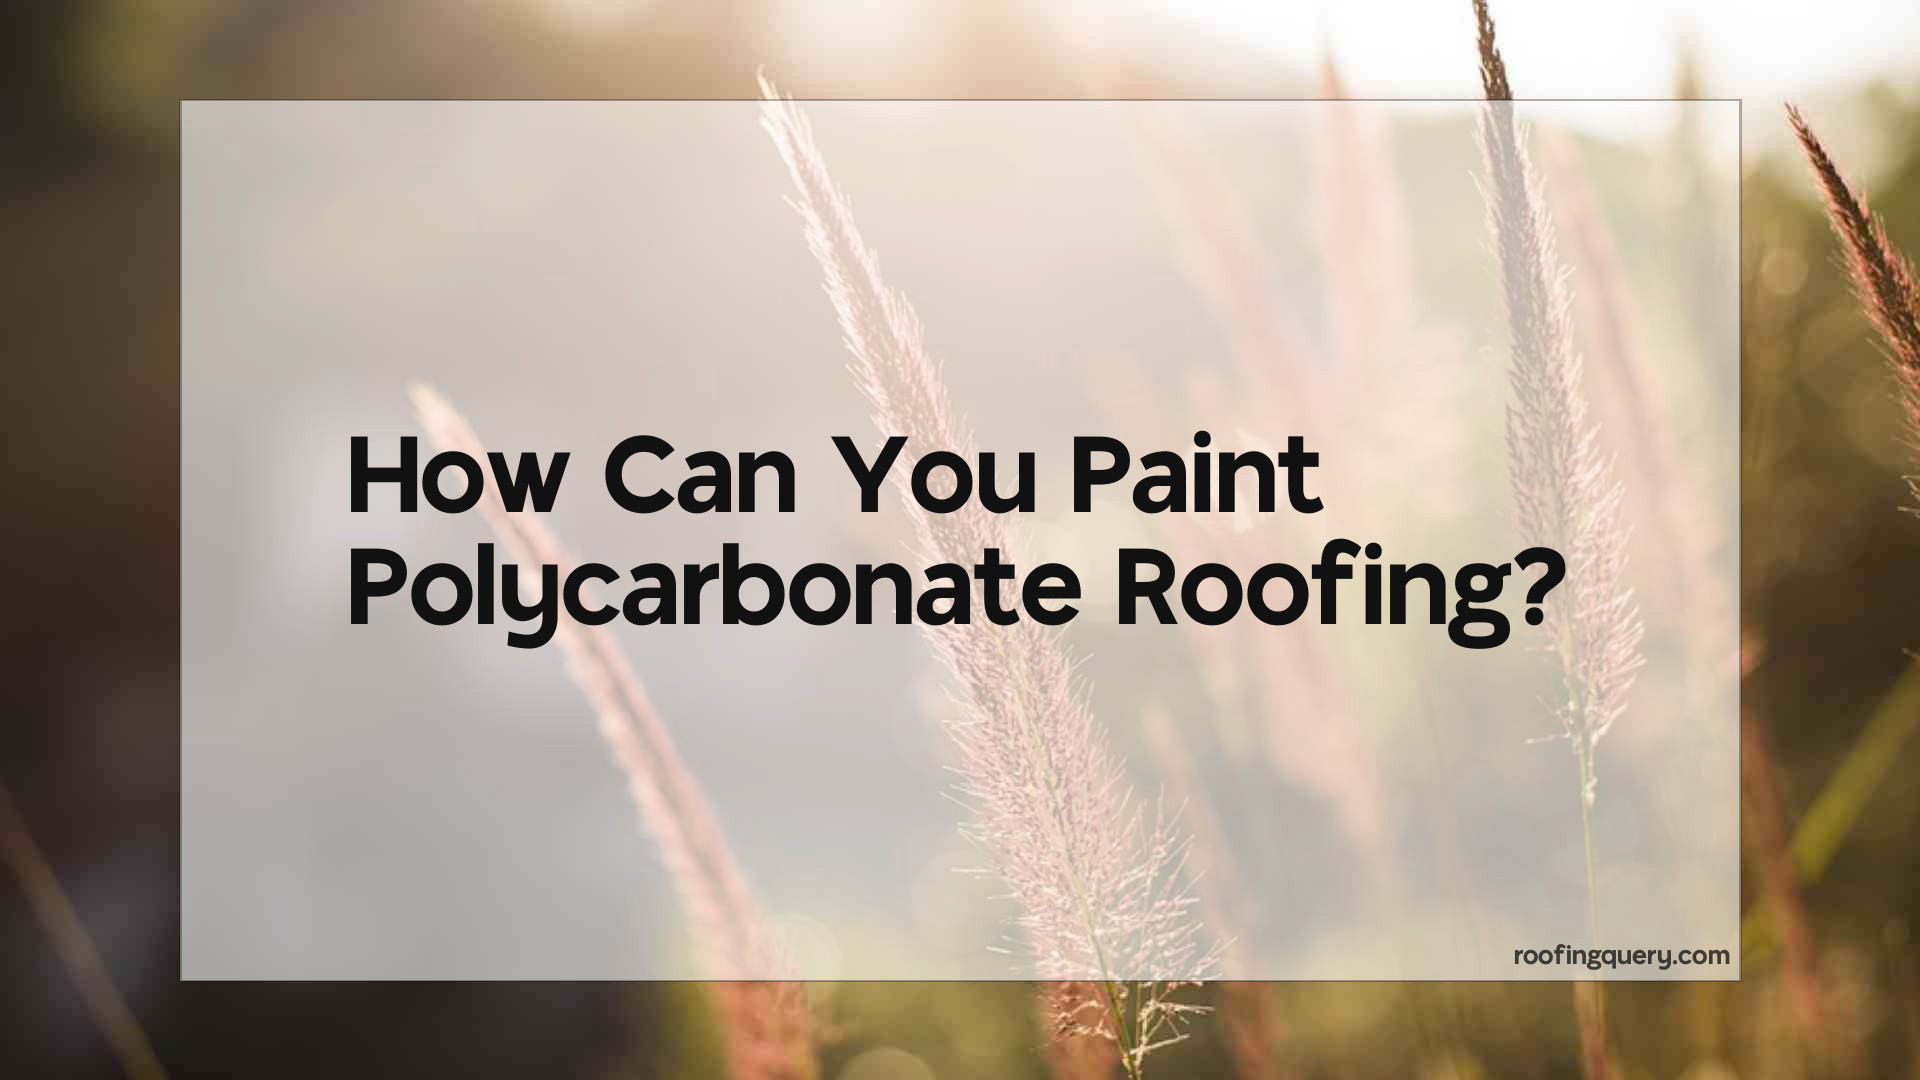 Can You Paint Polycarbonate Roofing